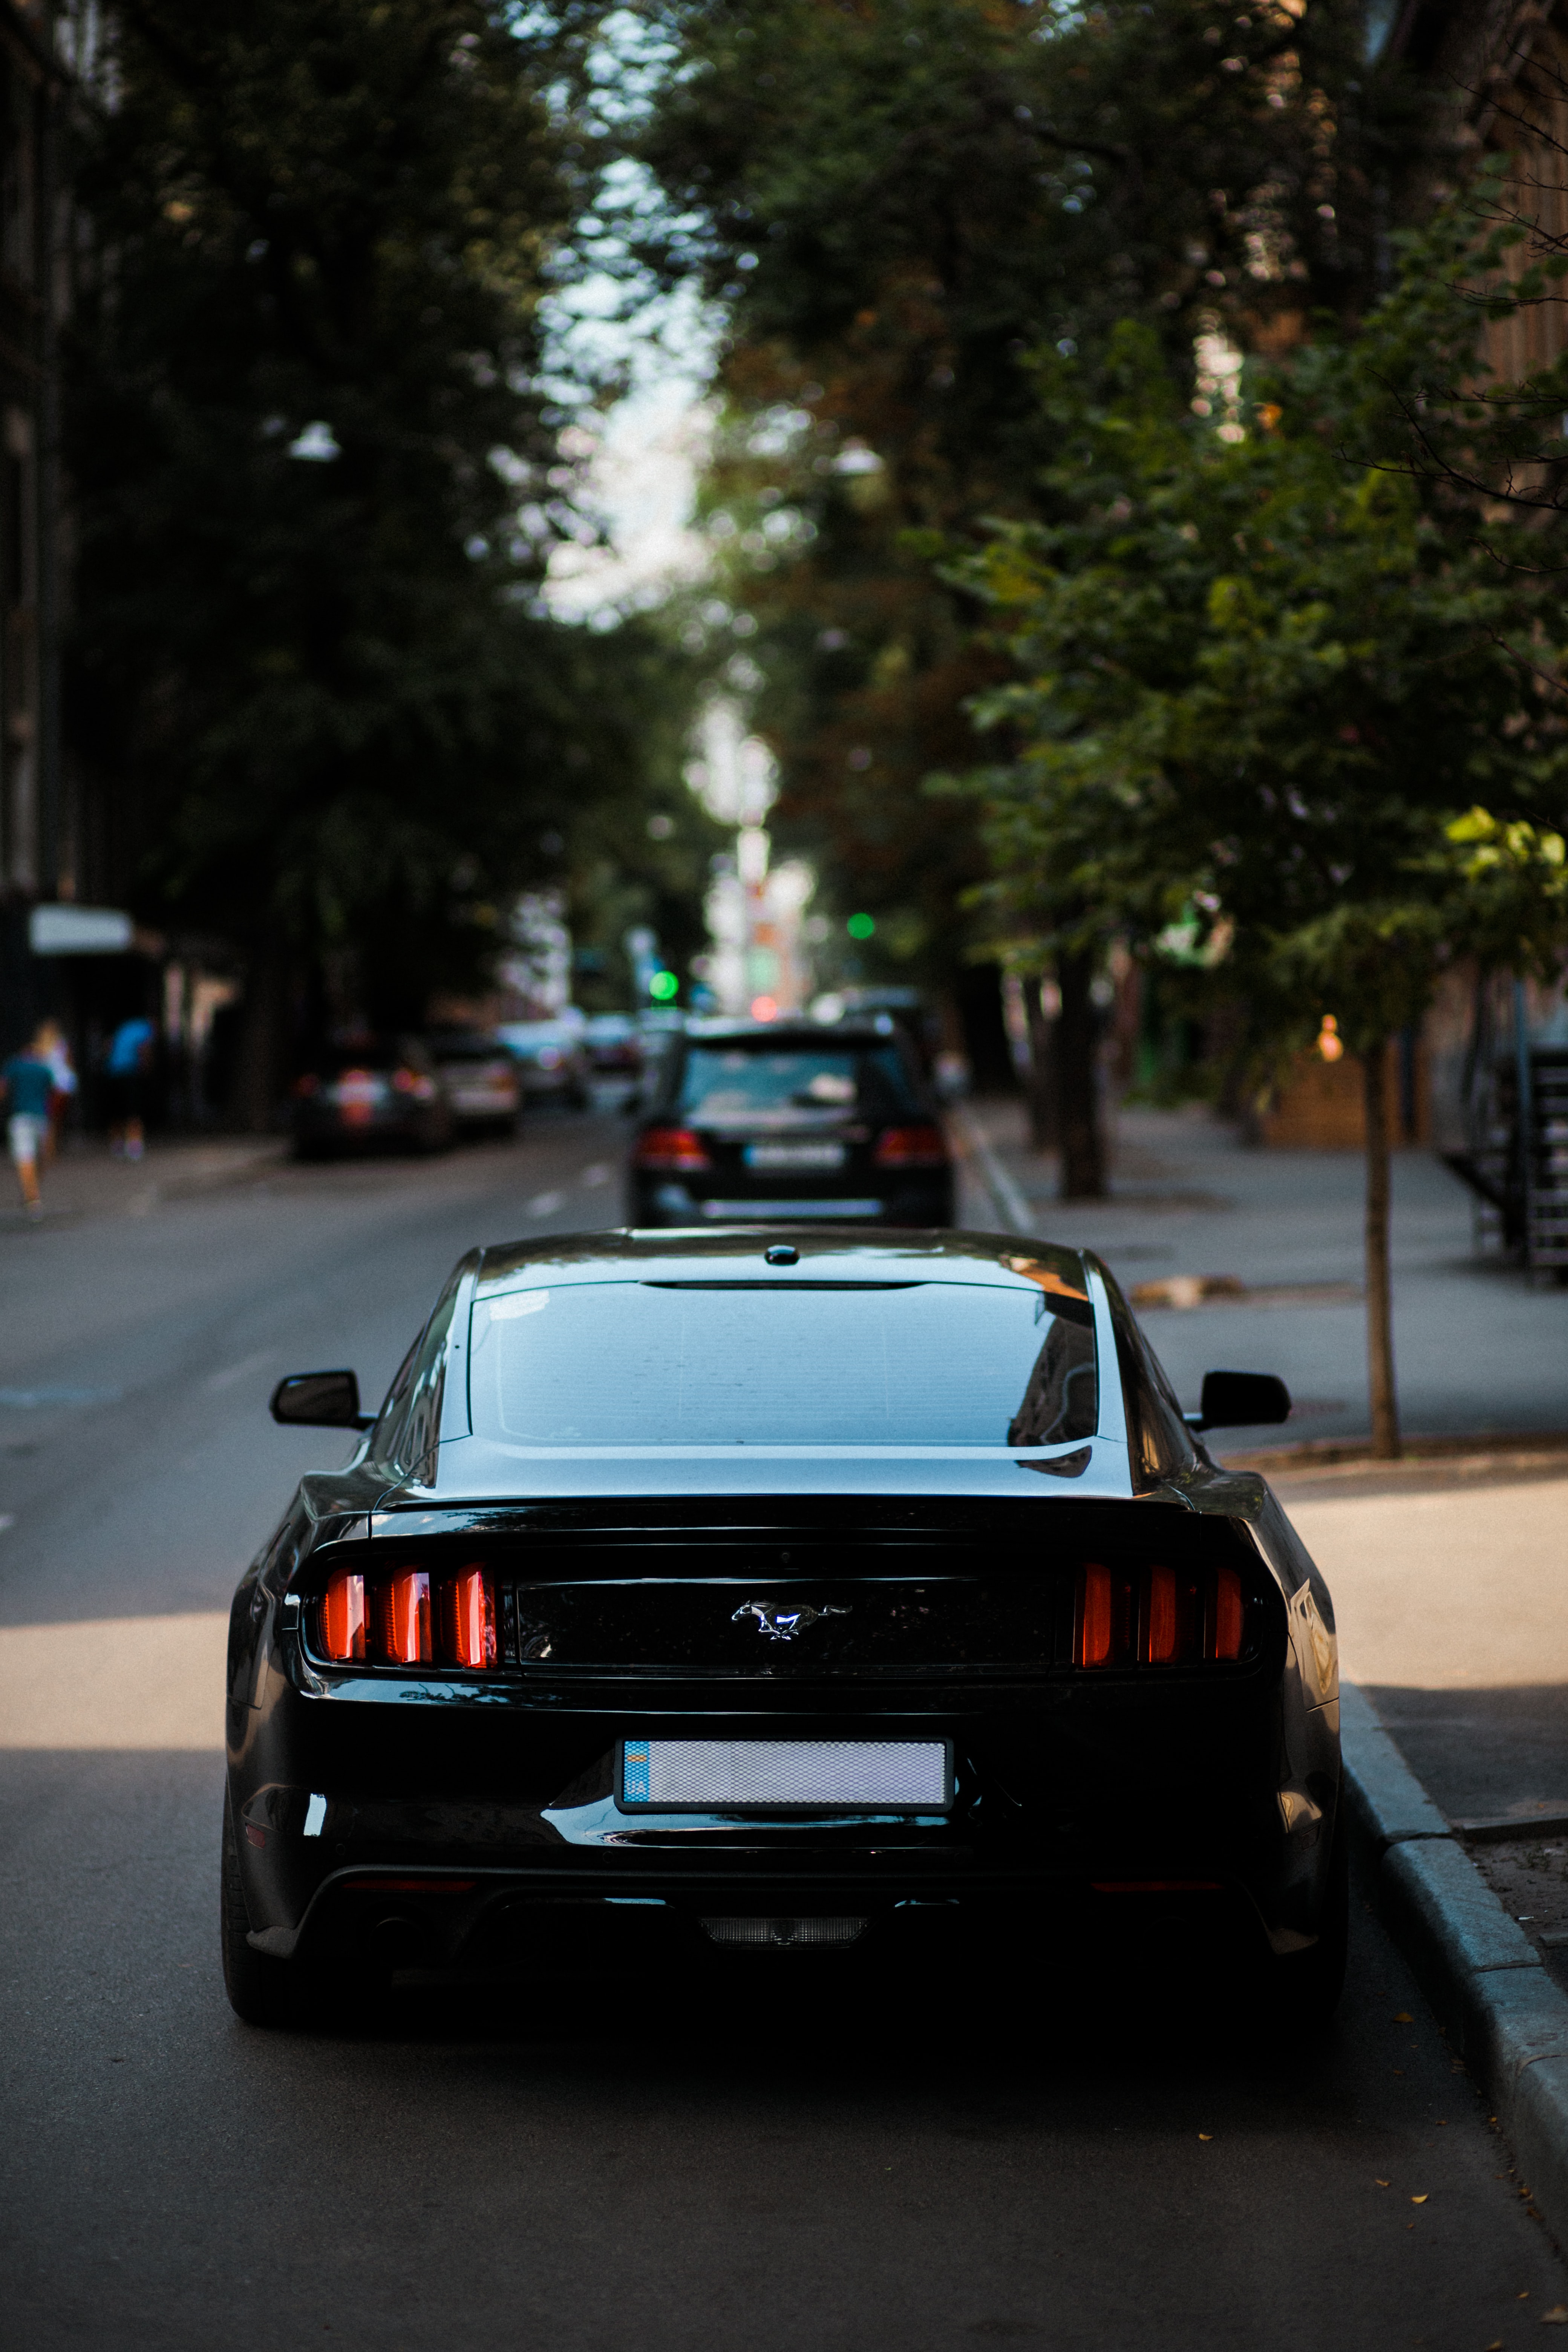 mustang, cars, black, lights, car, back view, rear view, headlights wallpaper for mobile